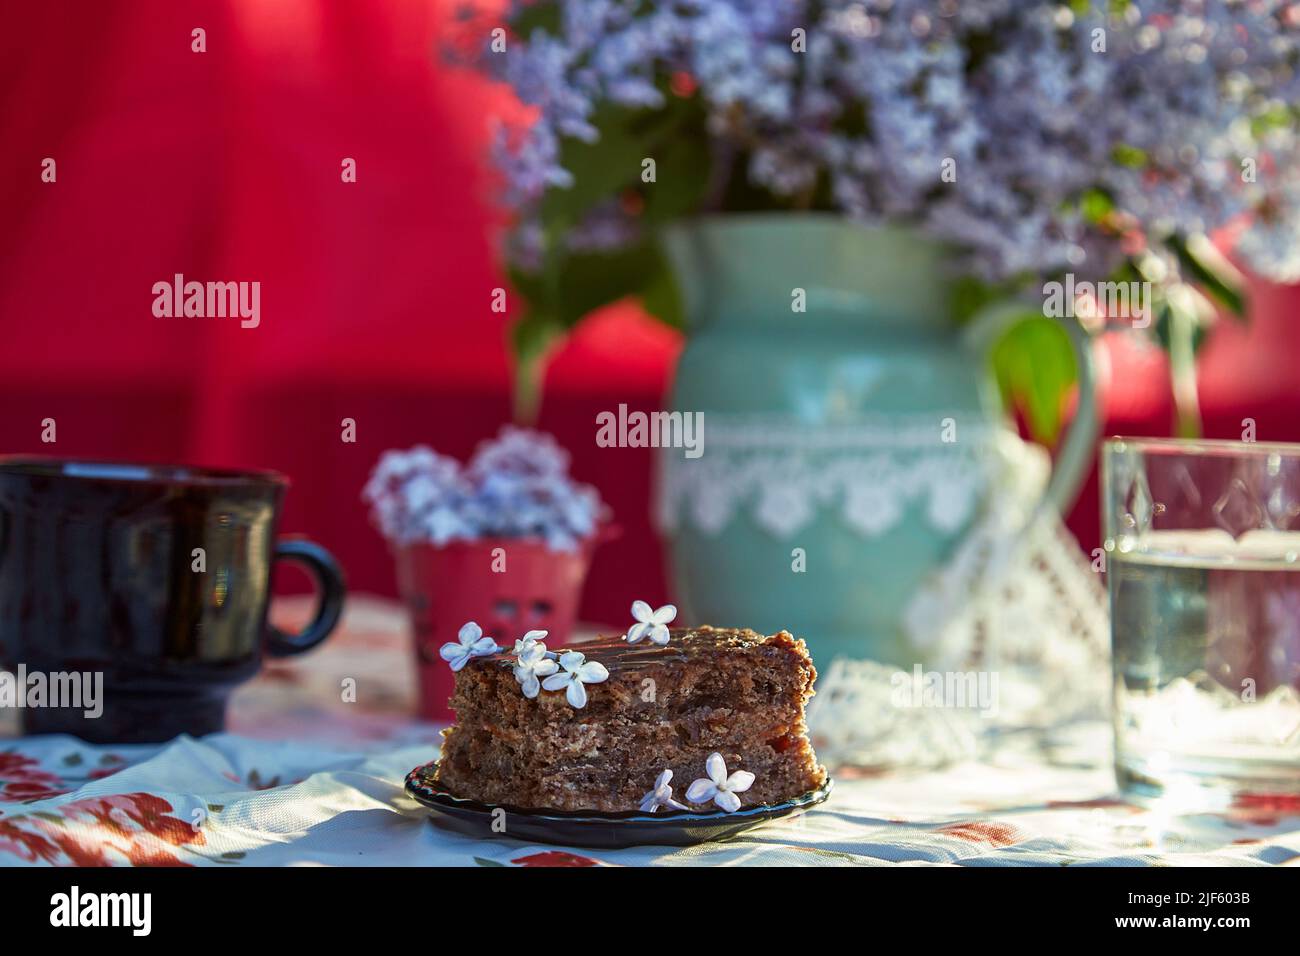 Aesthetic homemade chocolate cake. Dessert and cup of coffee among flowers. Atmospheric breakfast.  Stock Photo